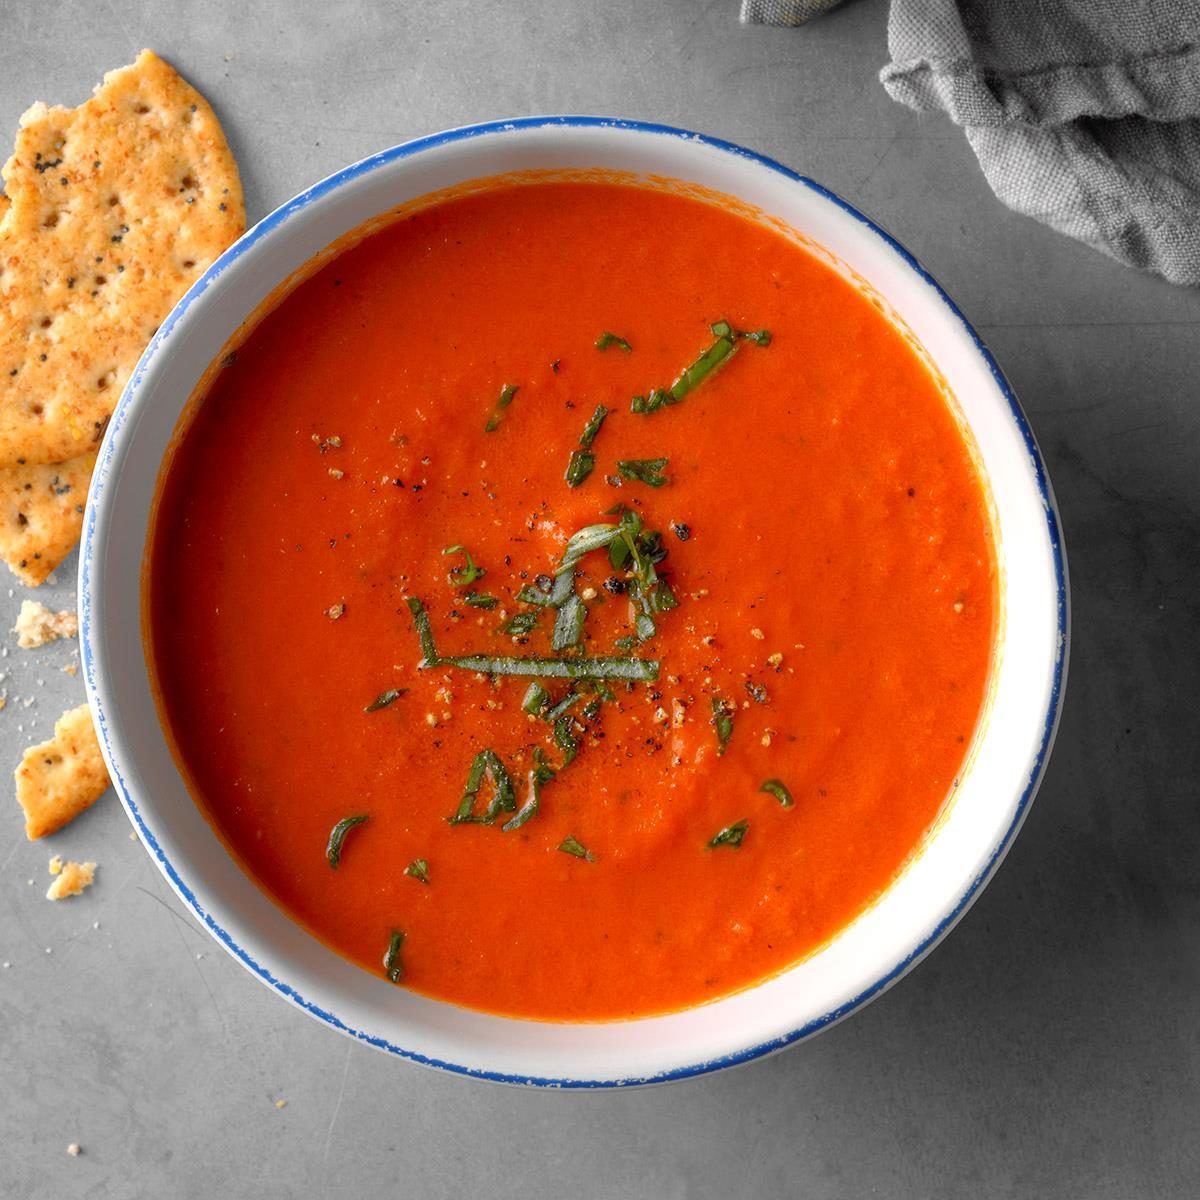 39 Essential Types of Soup Every Home Cook Should Know